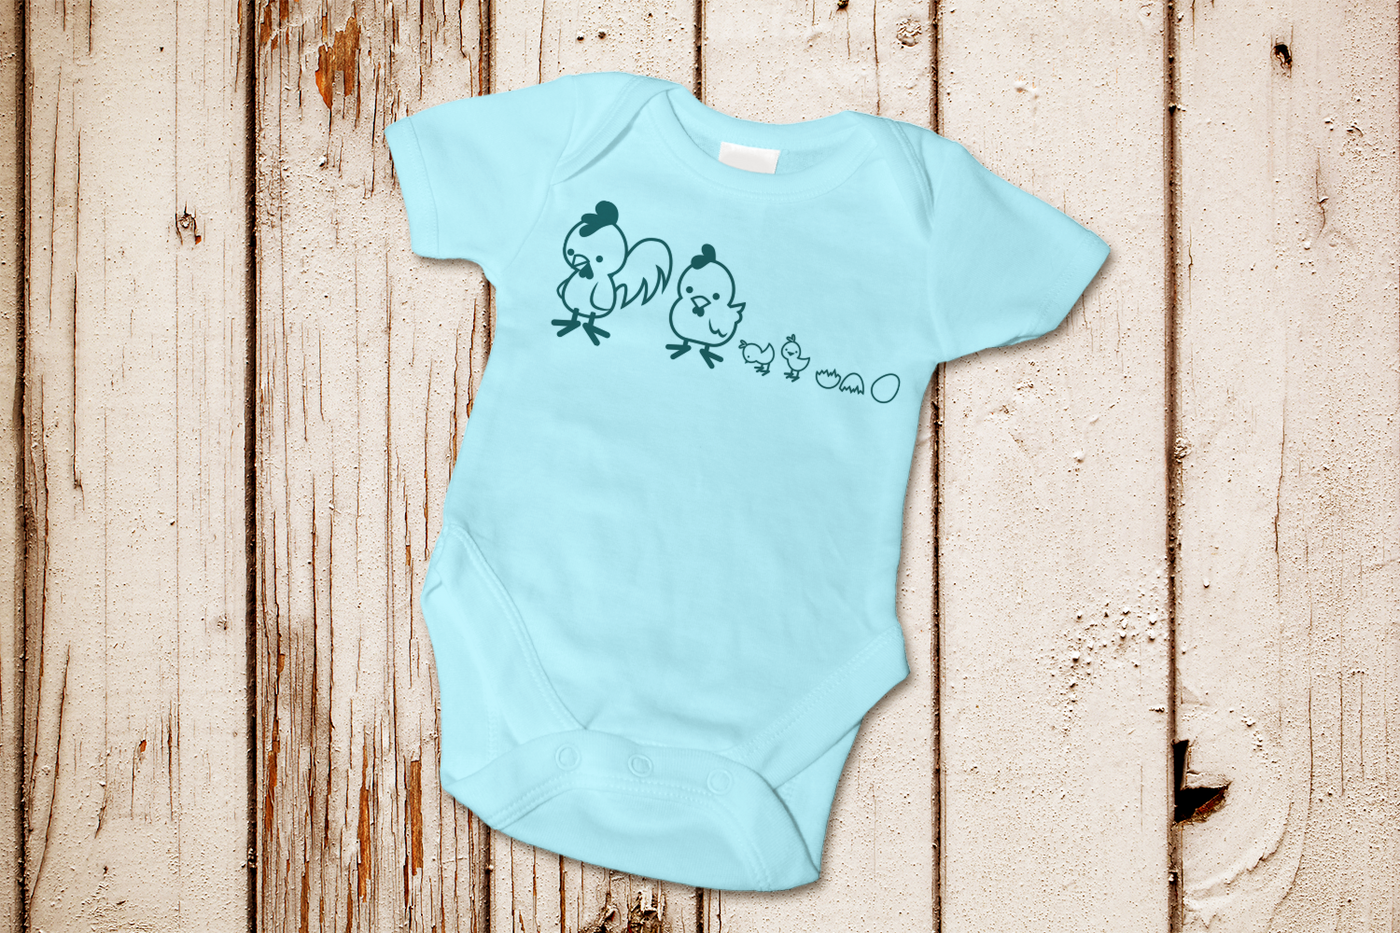 An aqua baby onesie with a family of chickens as a single color design.